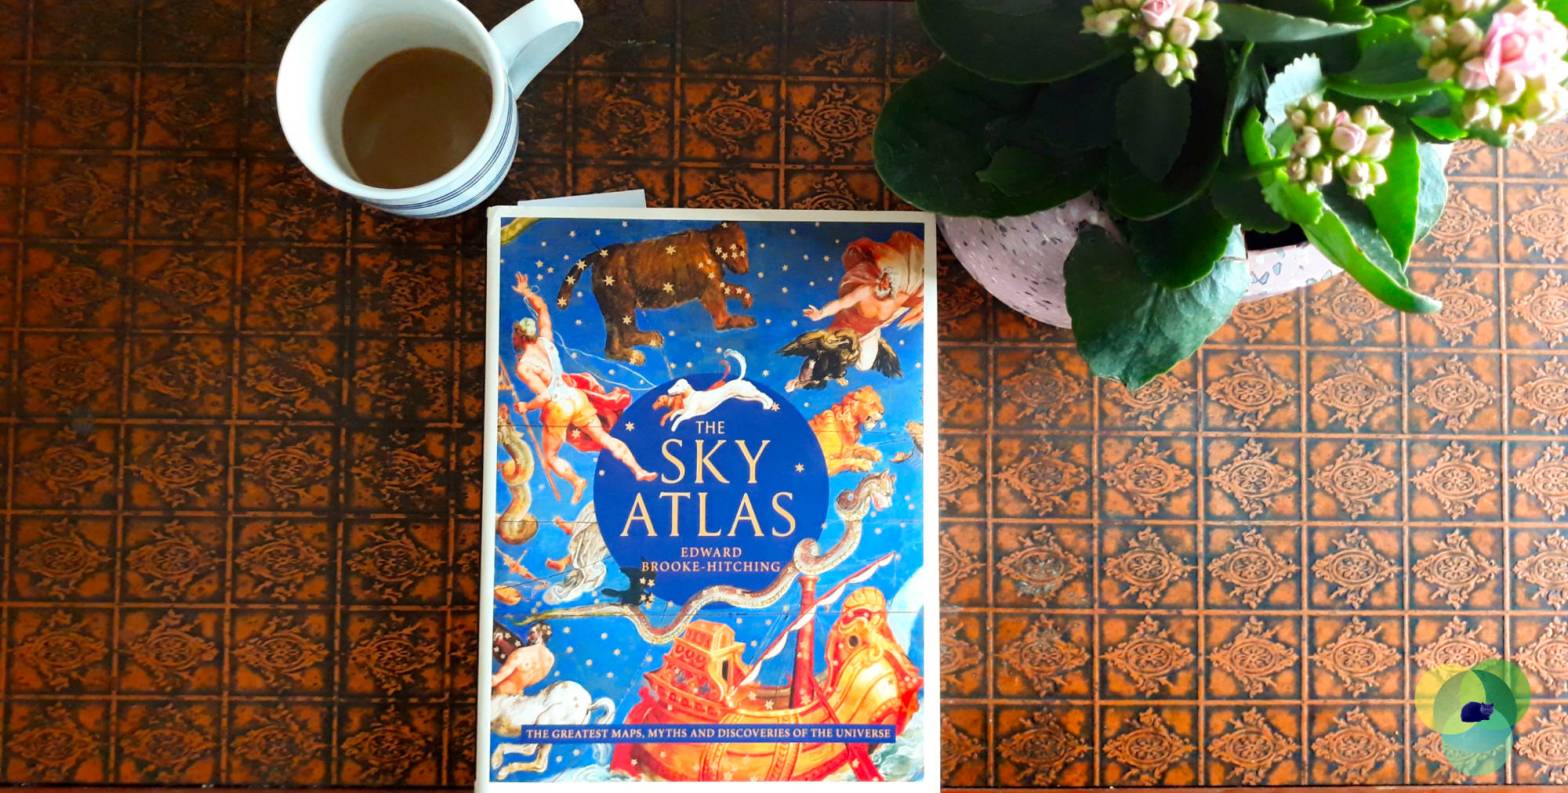 Book Review: The Sky Atlas: The Greatest Map Myths and Discoveries of the Universe by Edward Brooke-Hitching